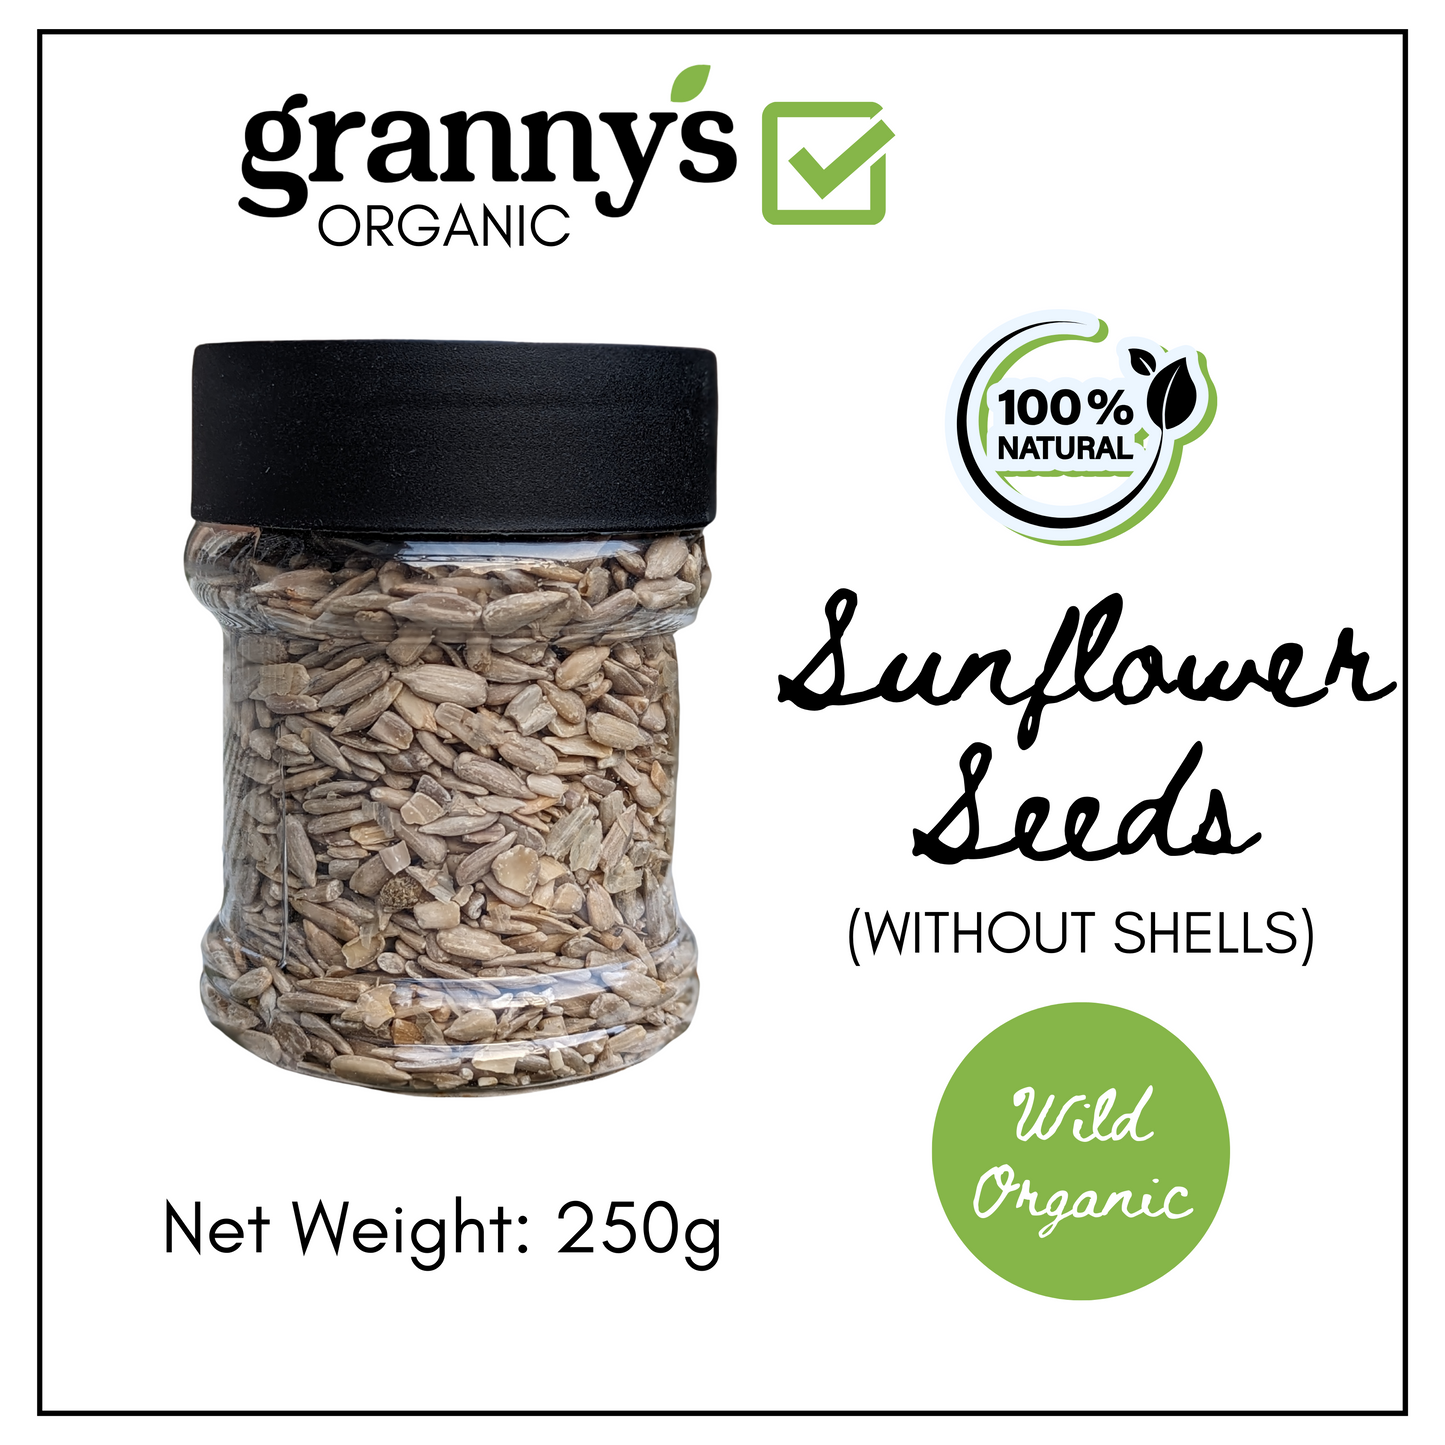 Sunflower Seeds (Without Shells)